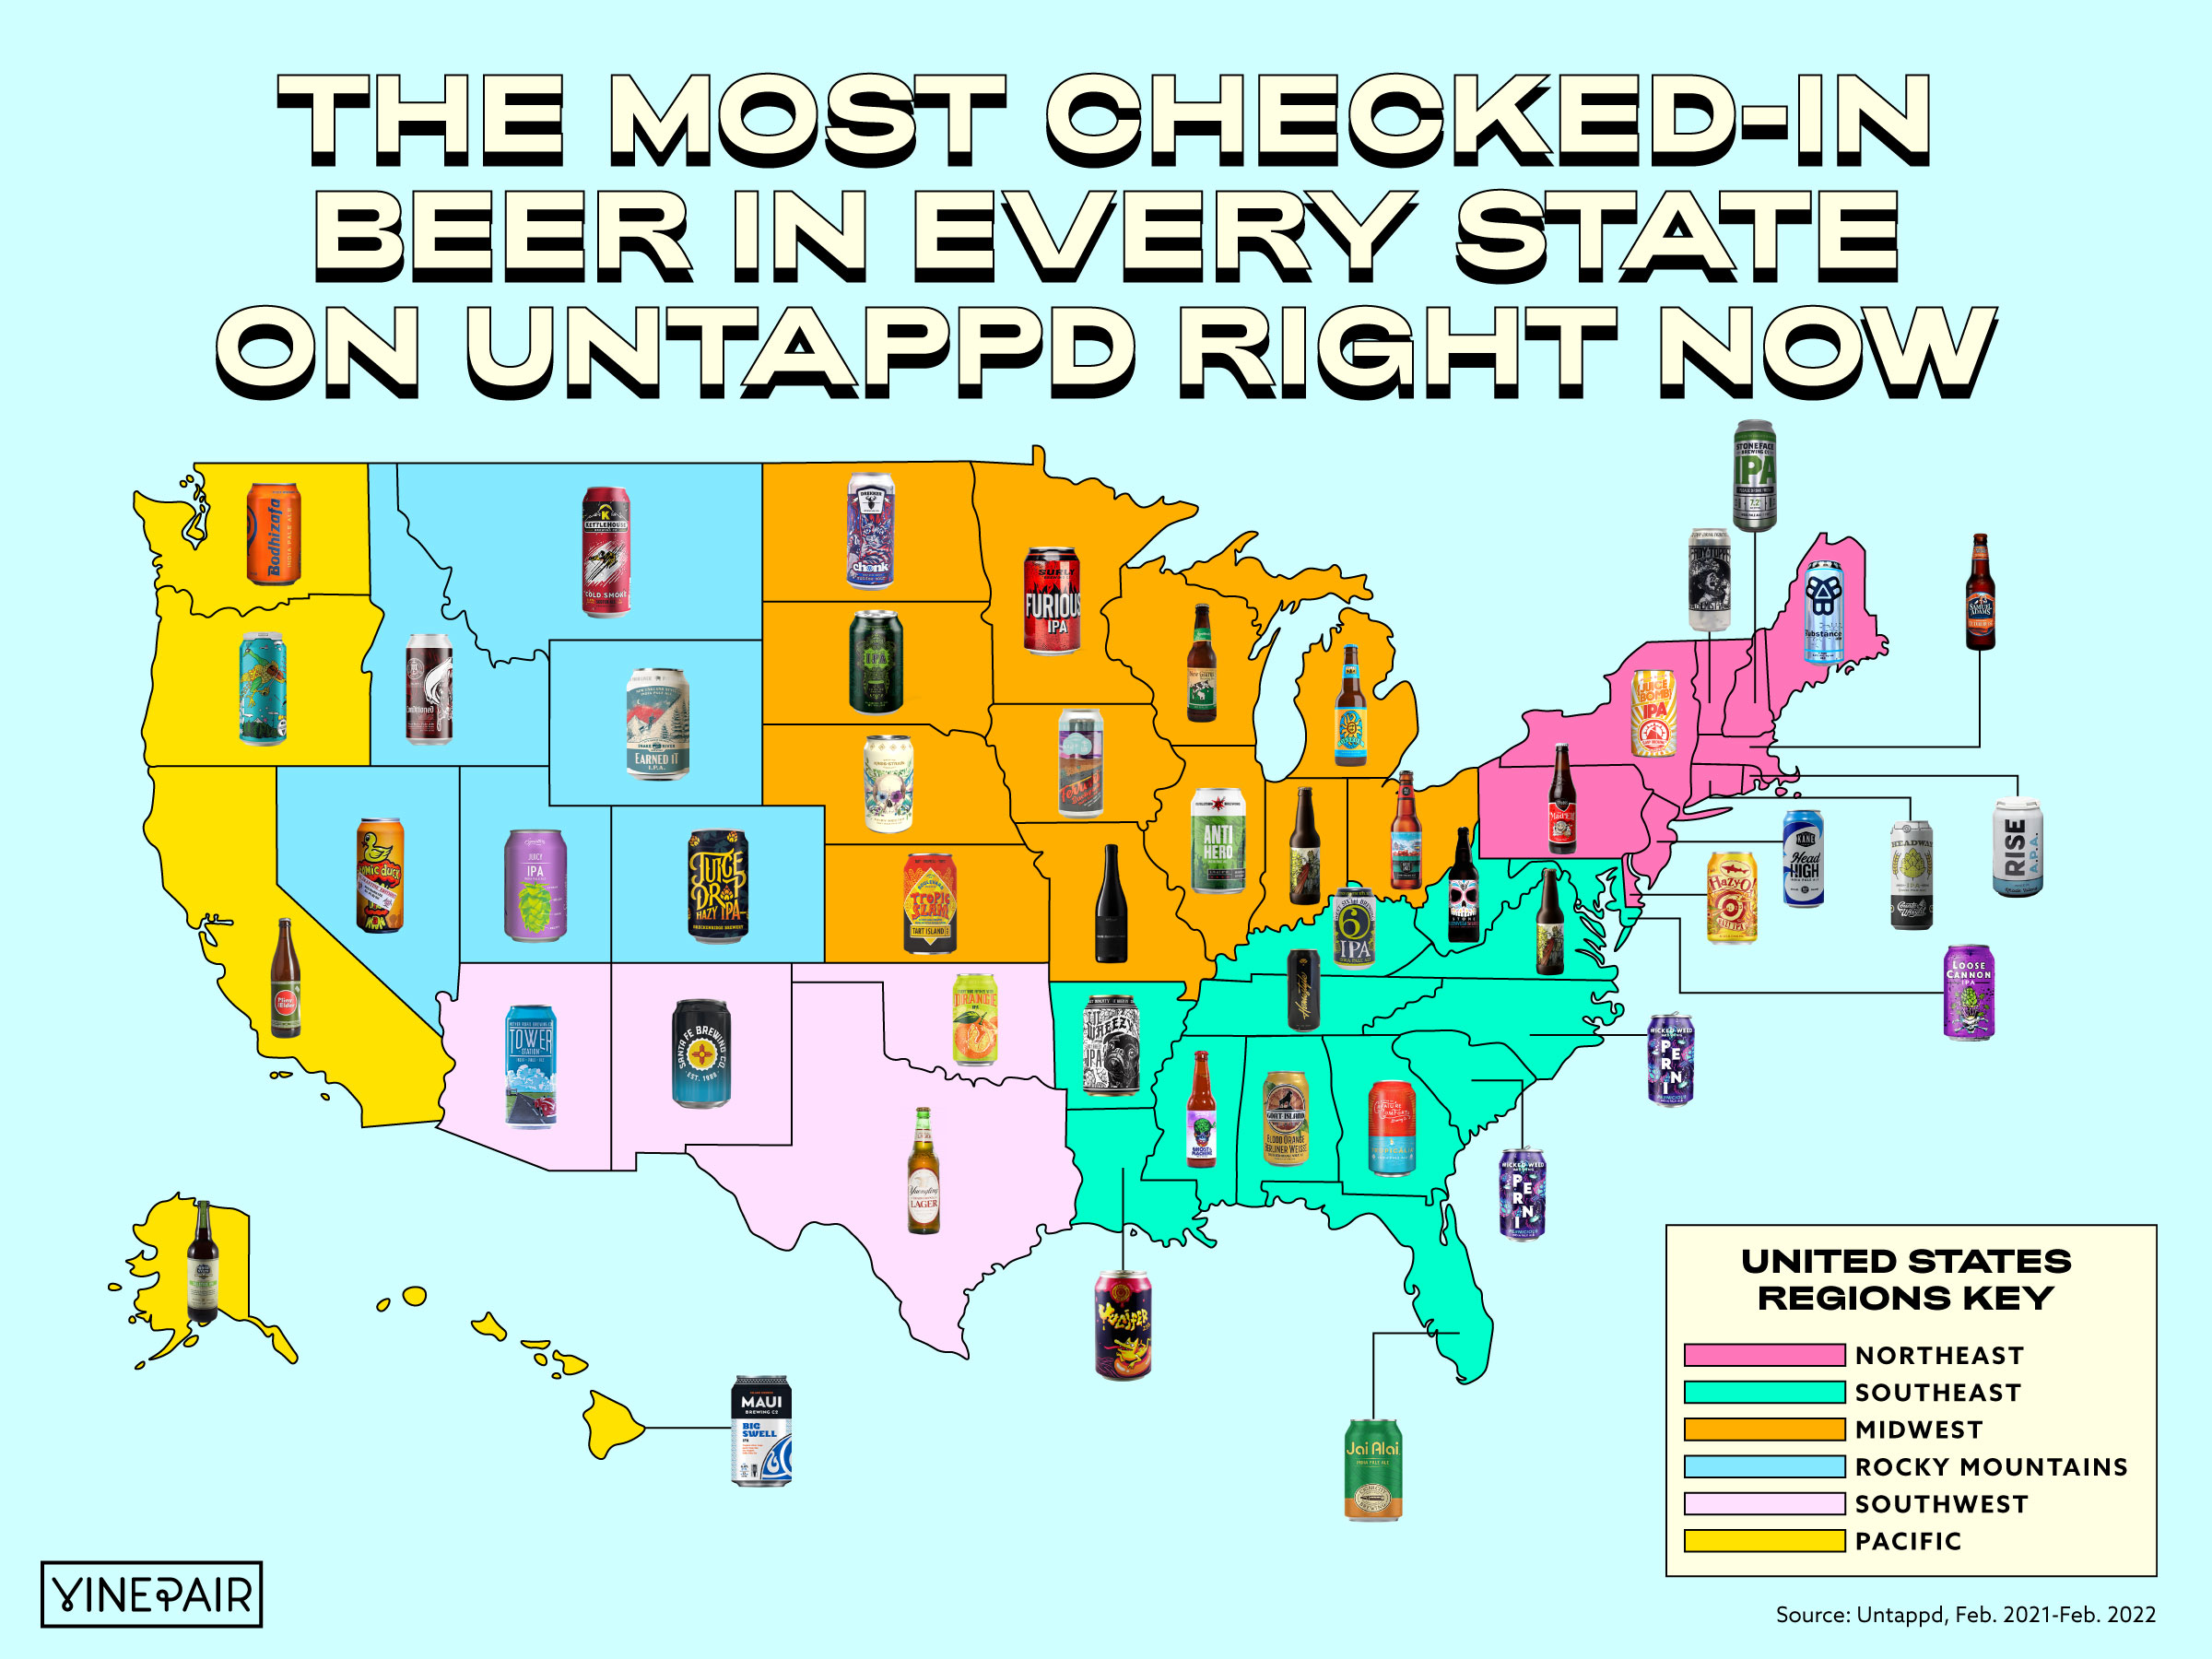 The Most Checked-In Beer in Every State, Via Untappd